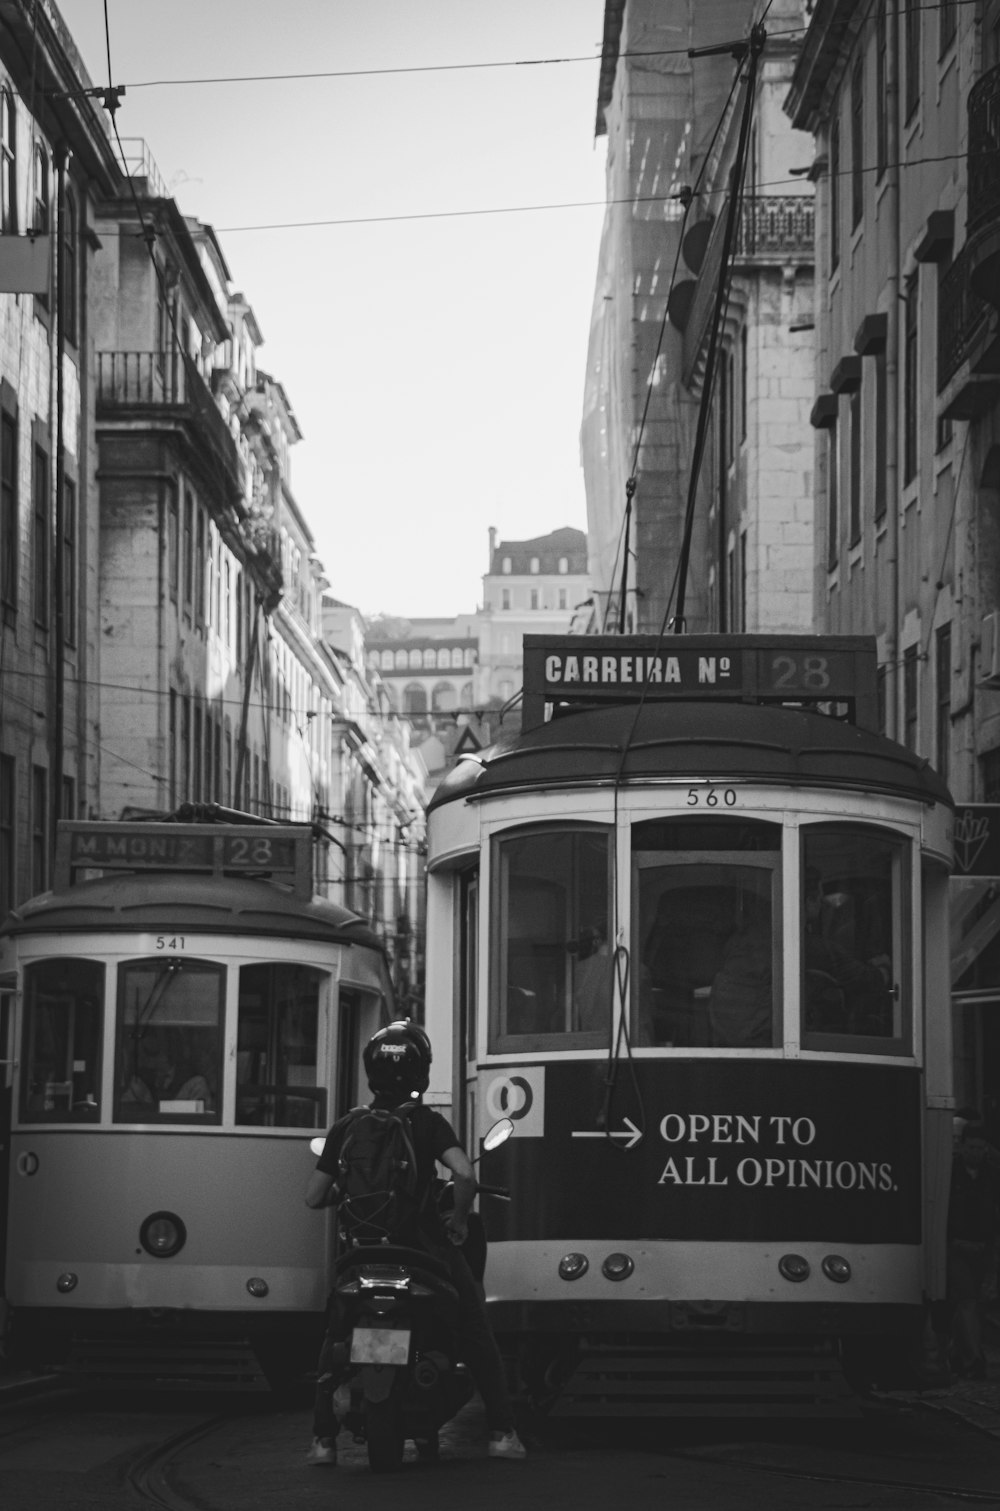 a black and white photo of two trolleys on a street